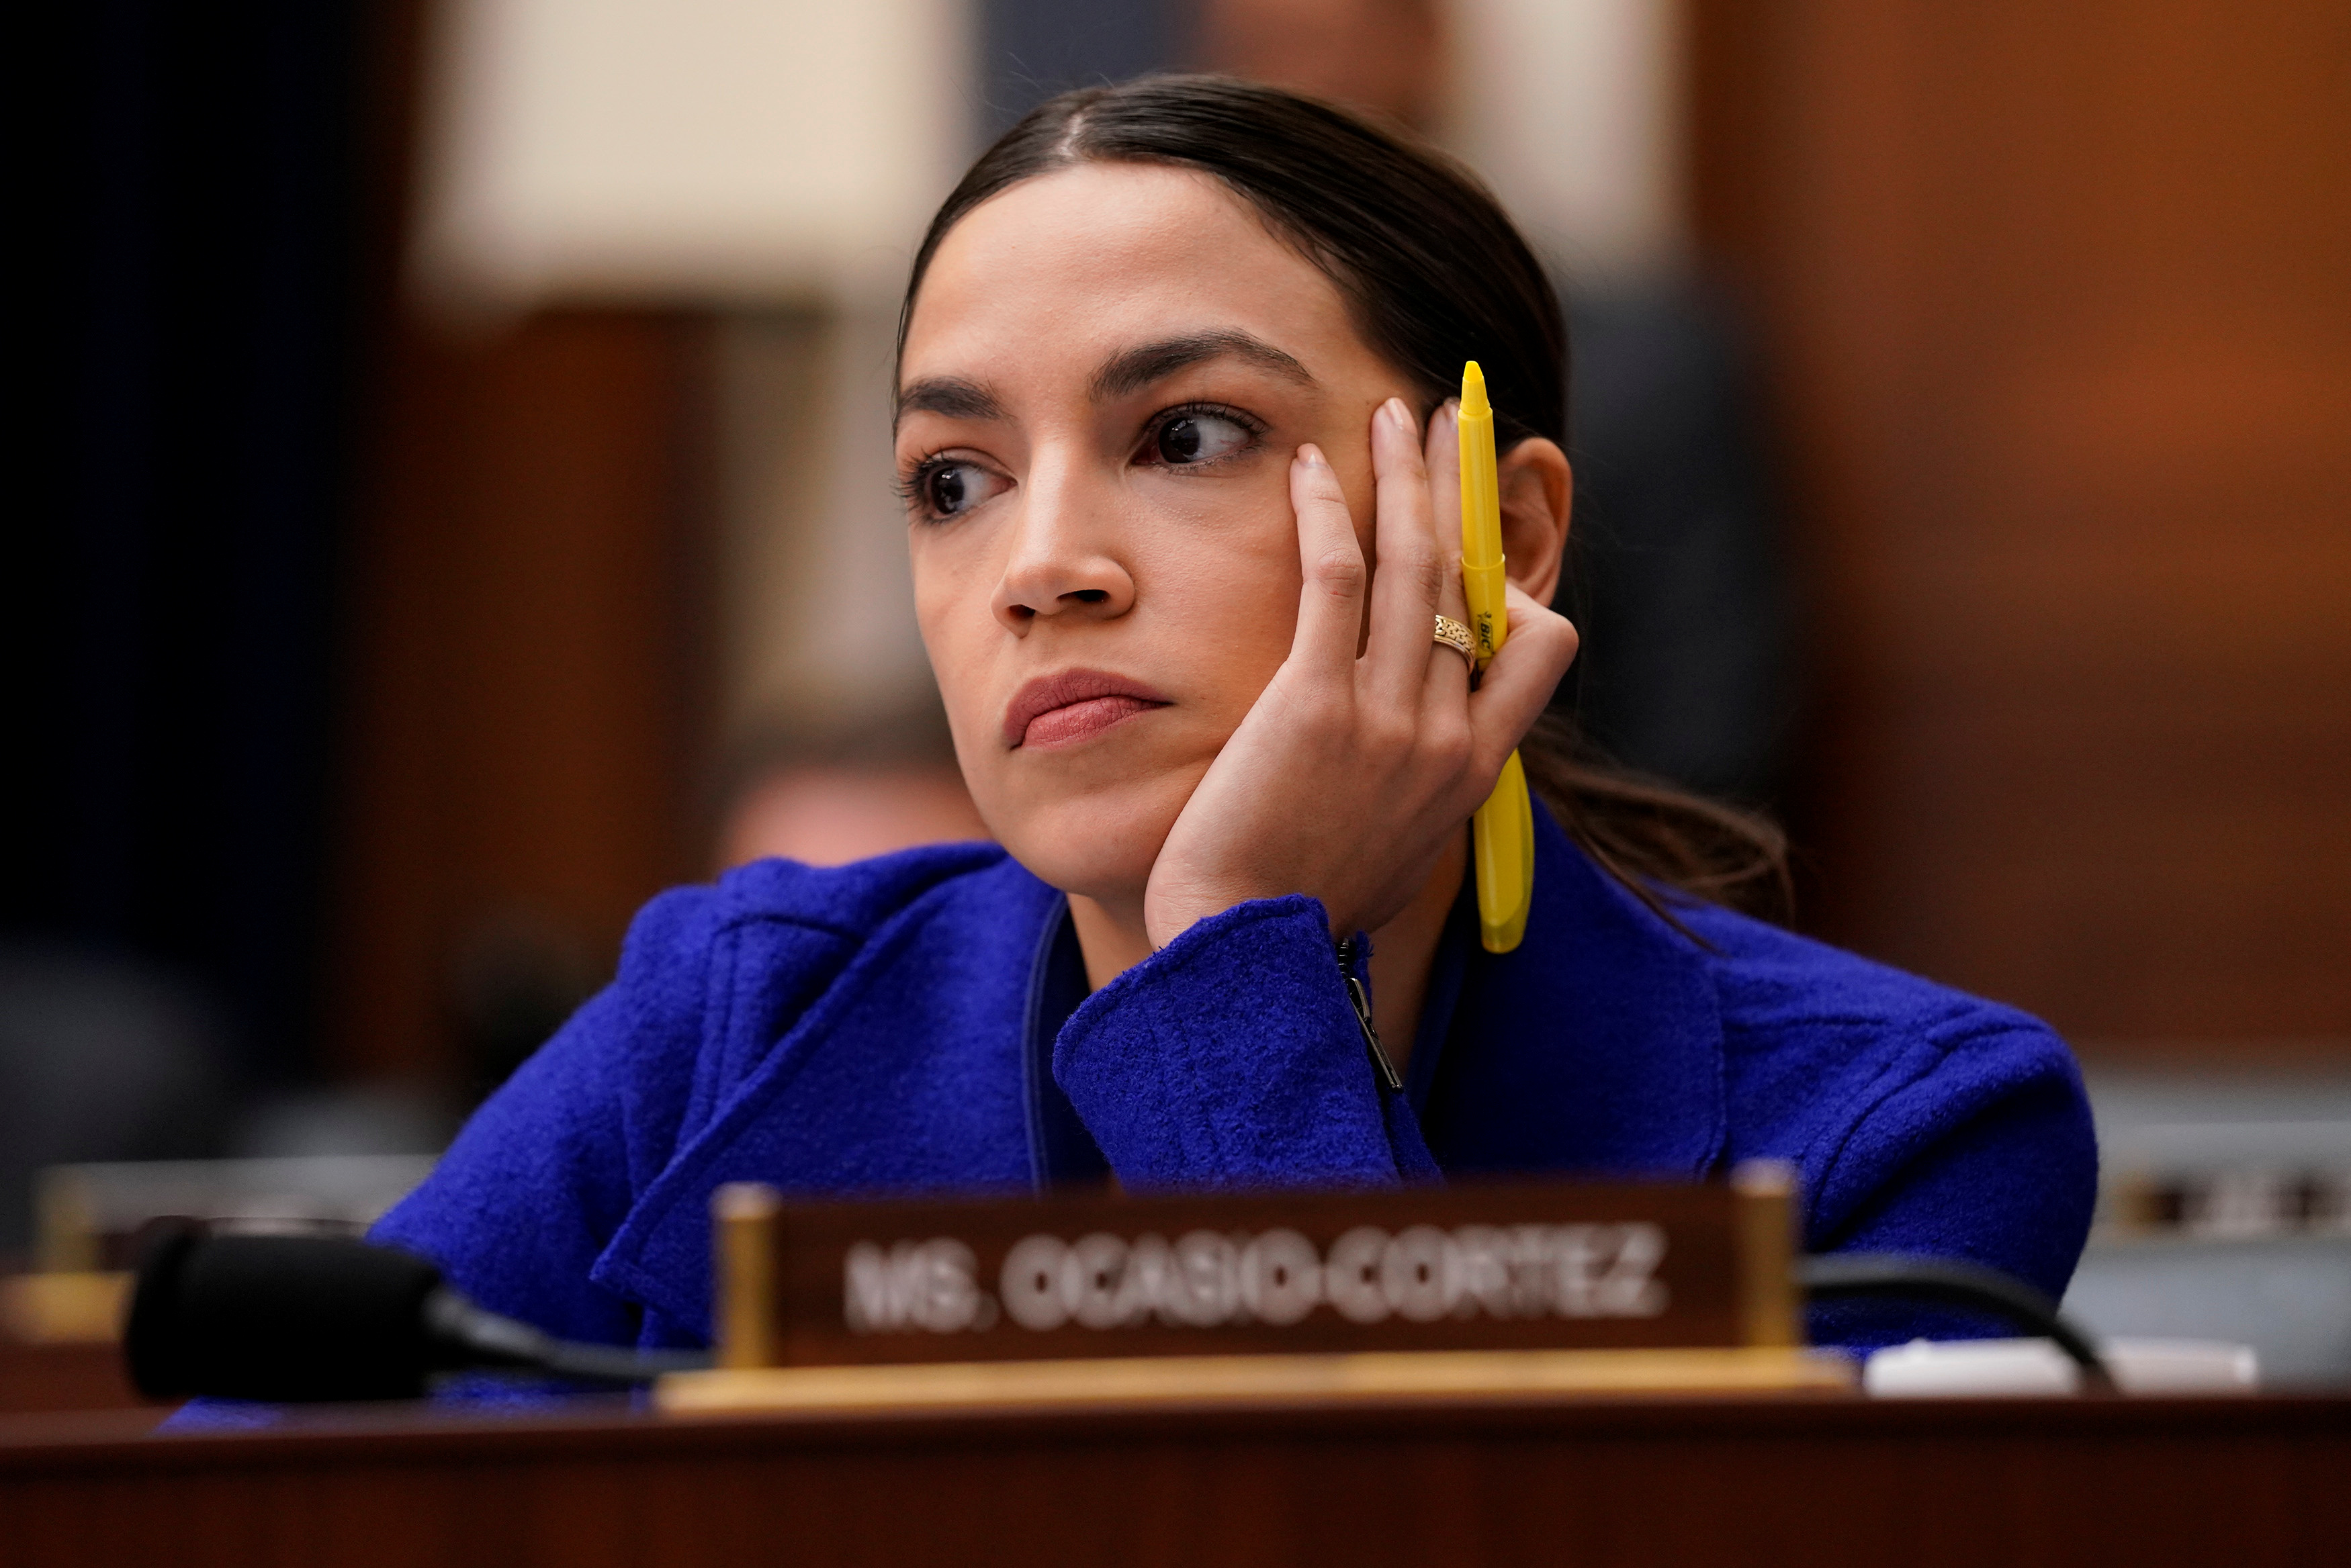 Rep. Alexandria Ocasio-Cortez (D-NY) looks on as bank CEOs testify before a House Financial Services Committee hearing on Capitol Hill in Washington